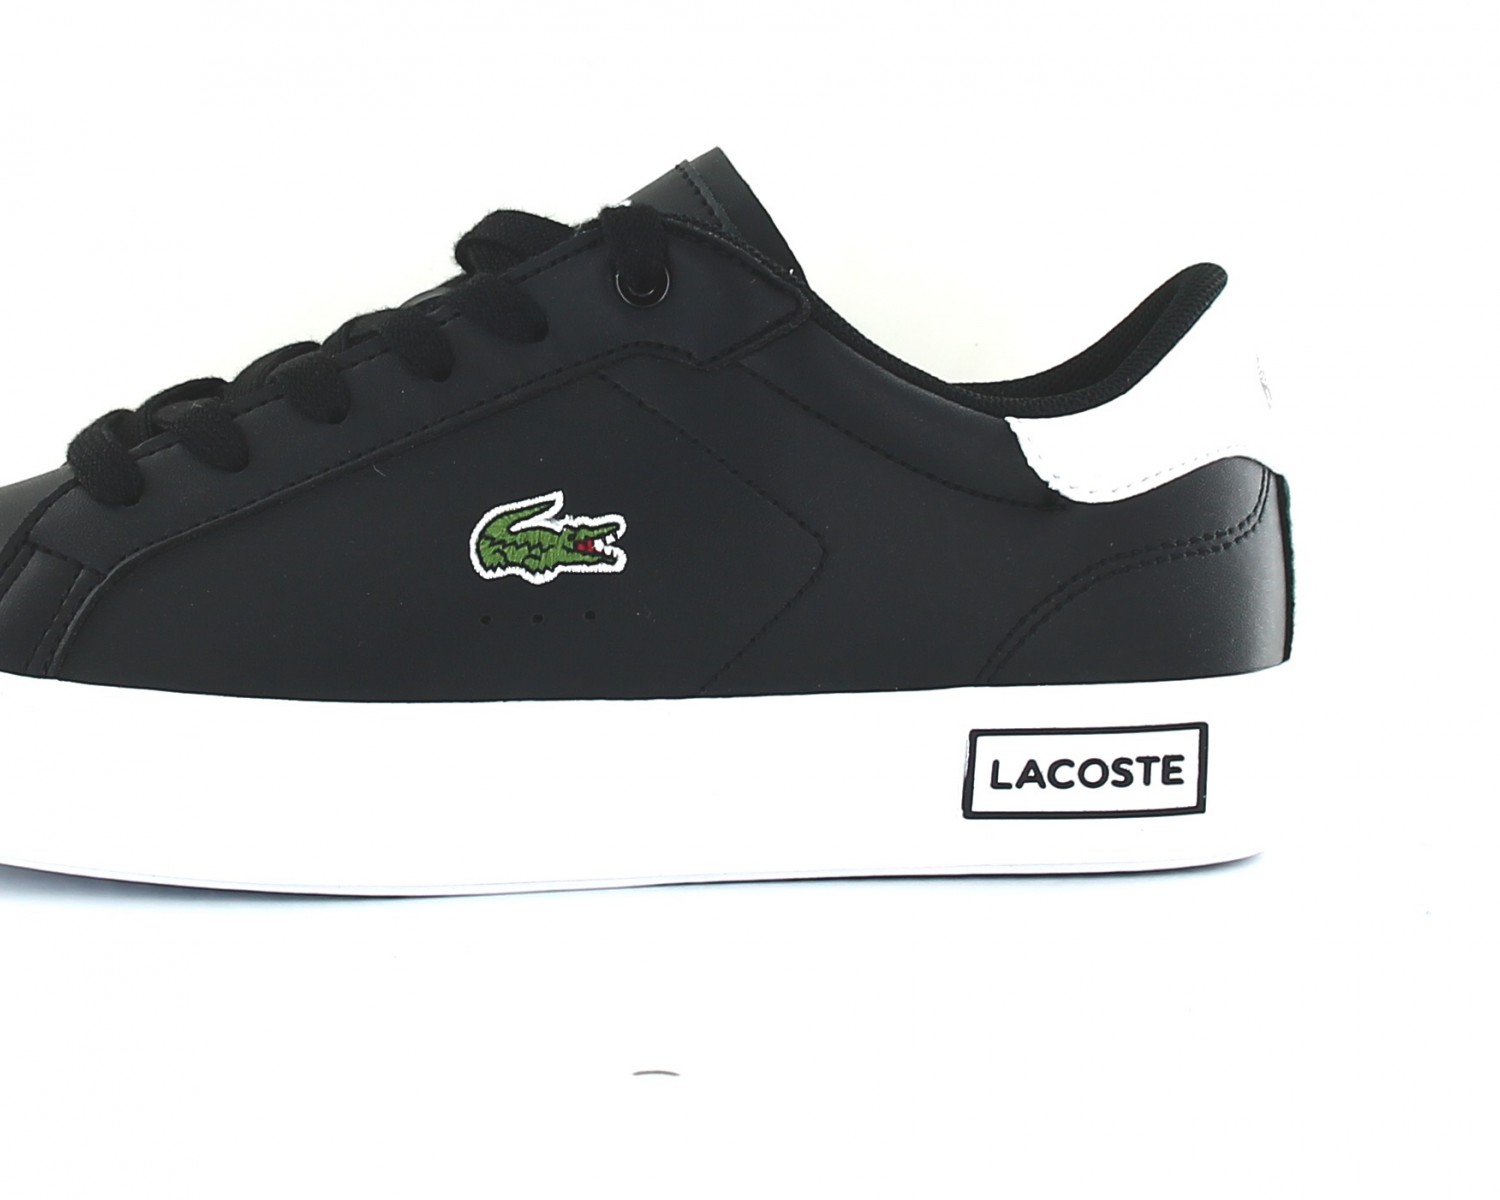 Chaussures Lacoste Powercourt femme